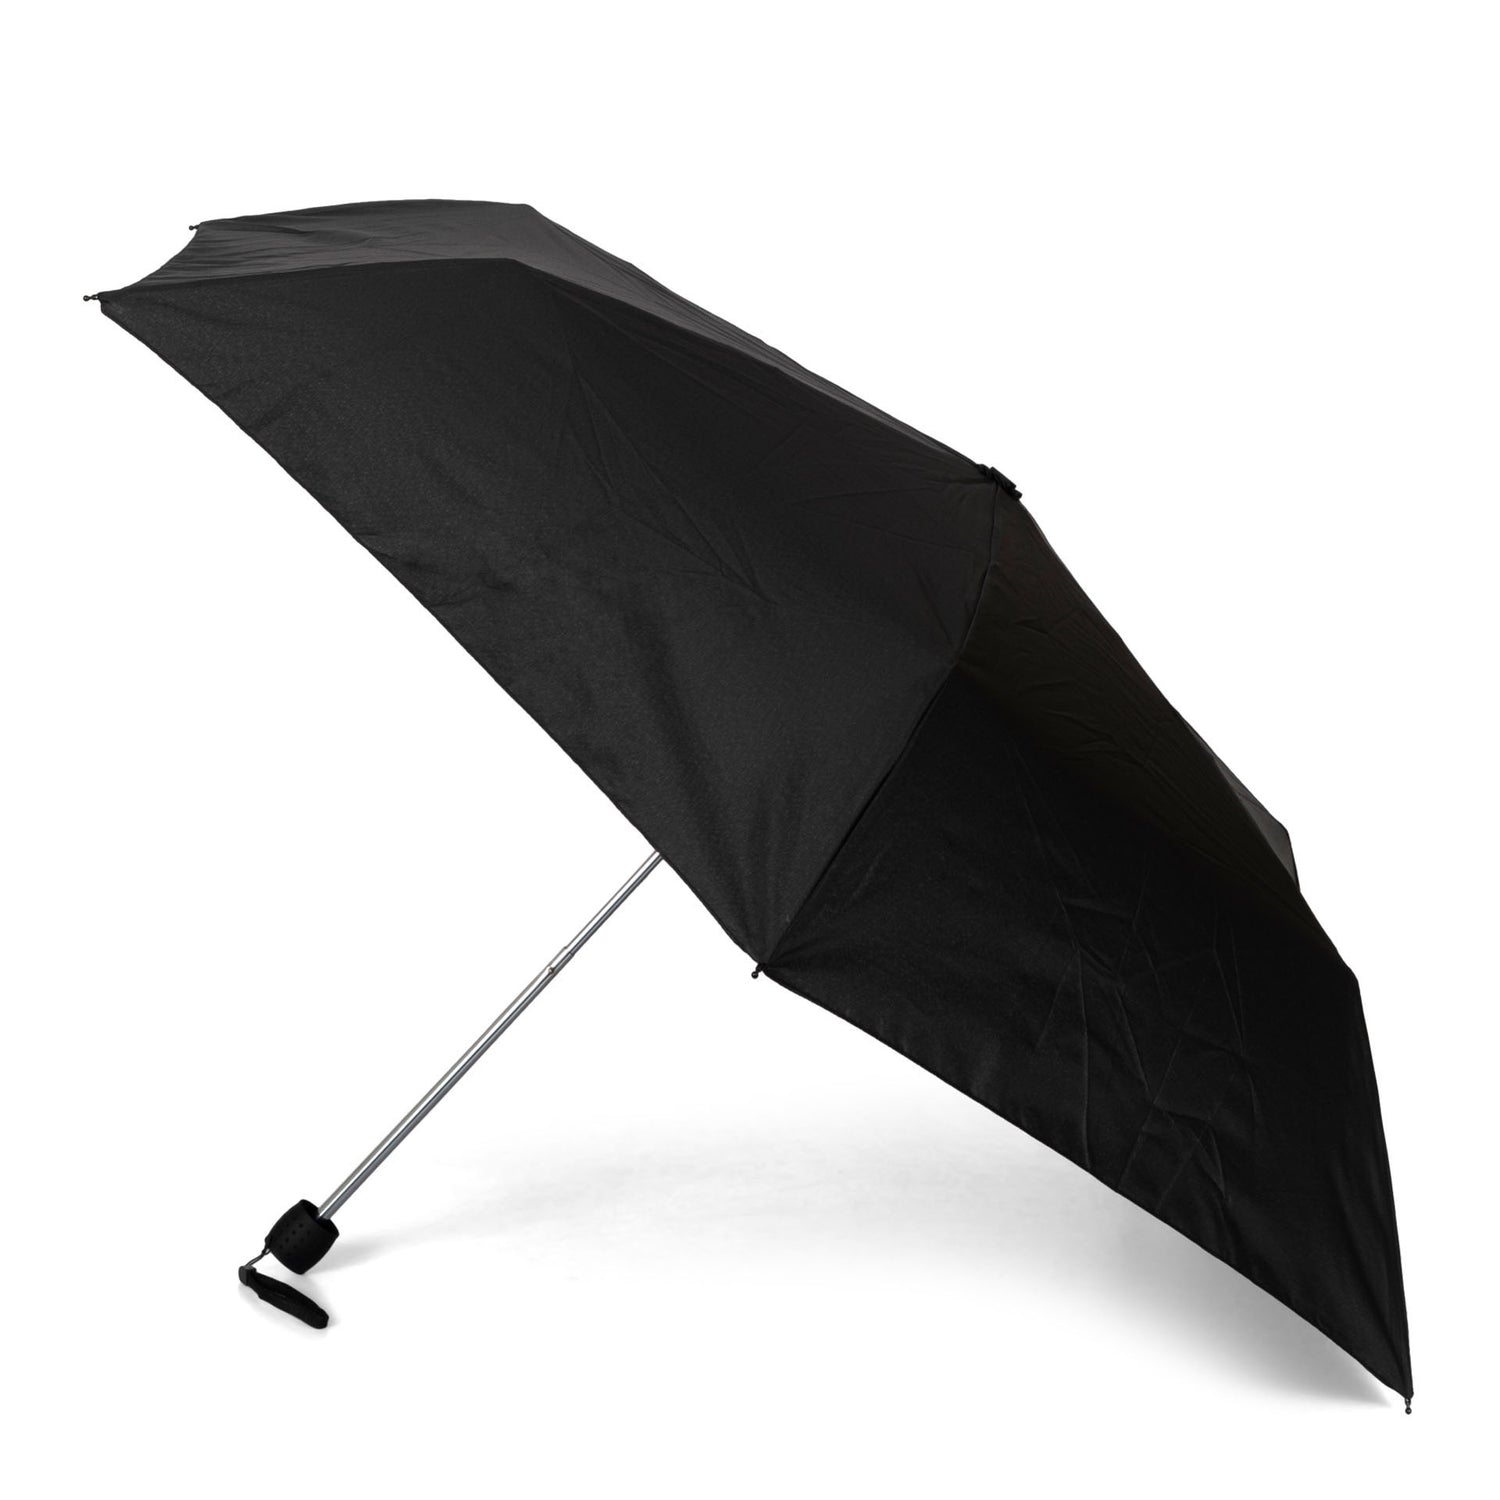 Side view of a black unisex umbrella called Tiny Manual designed by Tracker that is leaning on the right.